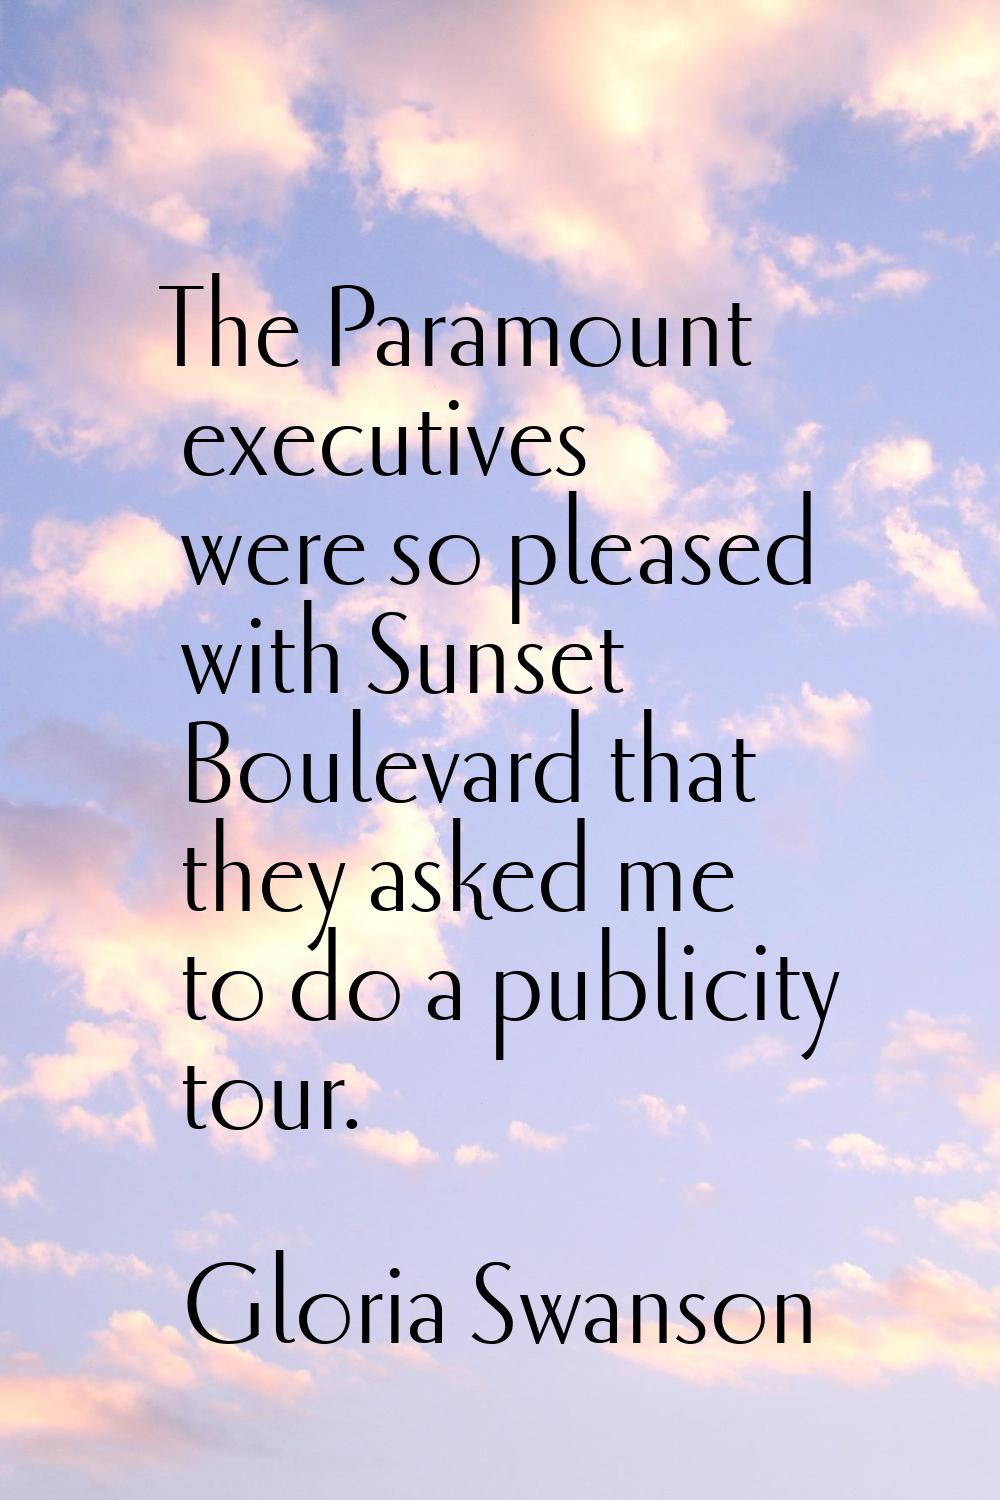 The Paramount executives were so pleased with Sunset Boulevard that they asked me to do a publicity